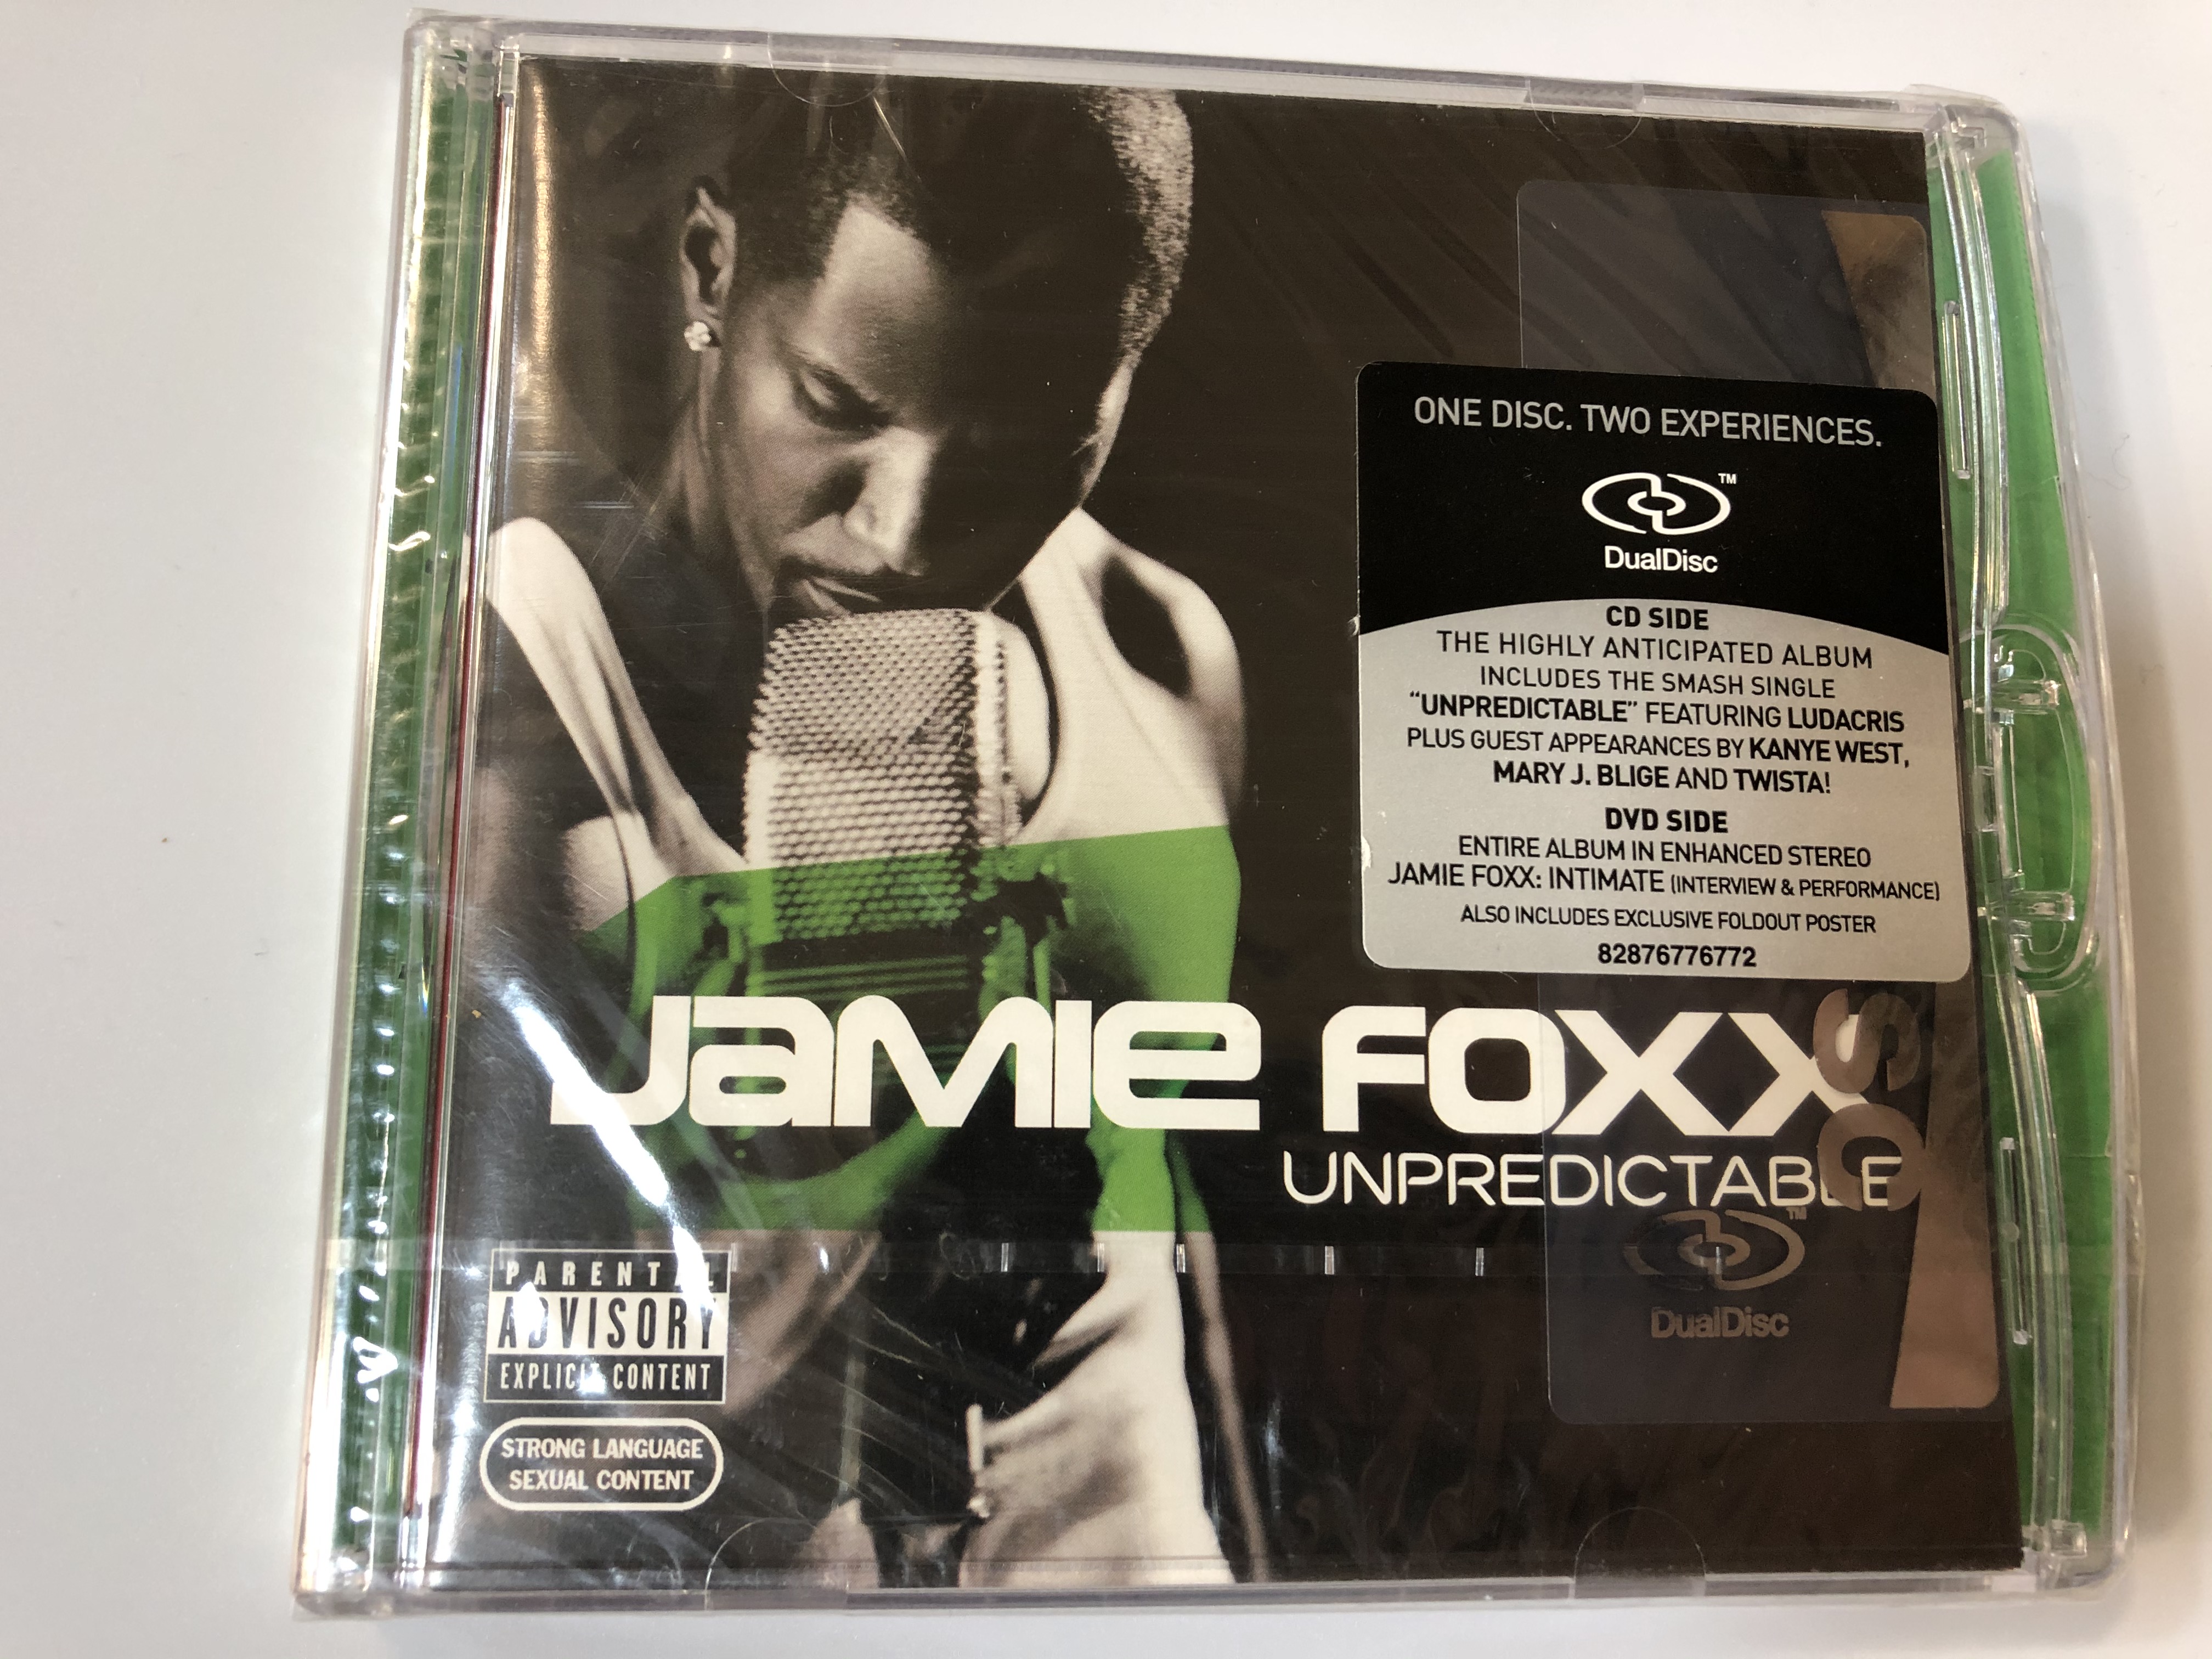 jamie-foxx-unpredictable-one-disc-two-experiences.-cd-side-the-highly-anticipated-album-includes-the-smash-single-unpredictable-featuring-ludacris-plus-guest-appearances-by-kanye-we-1-.jpg